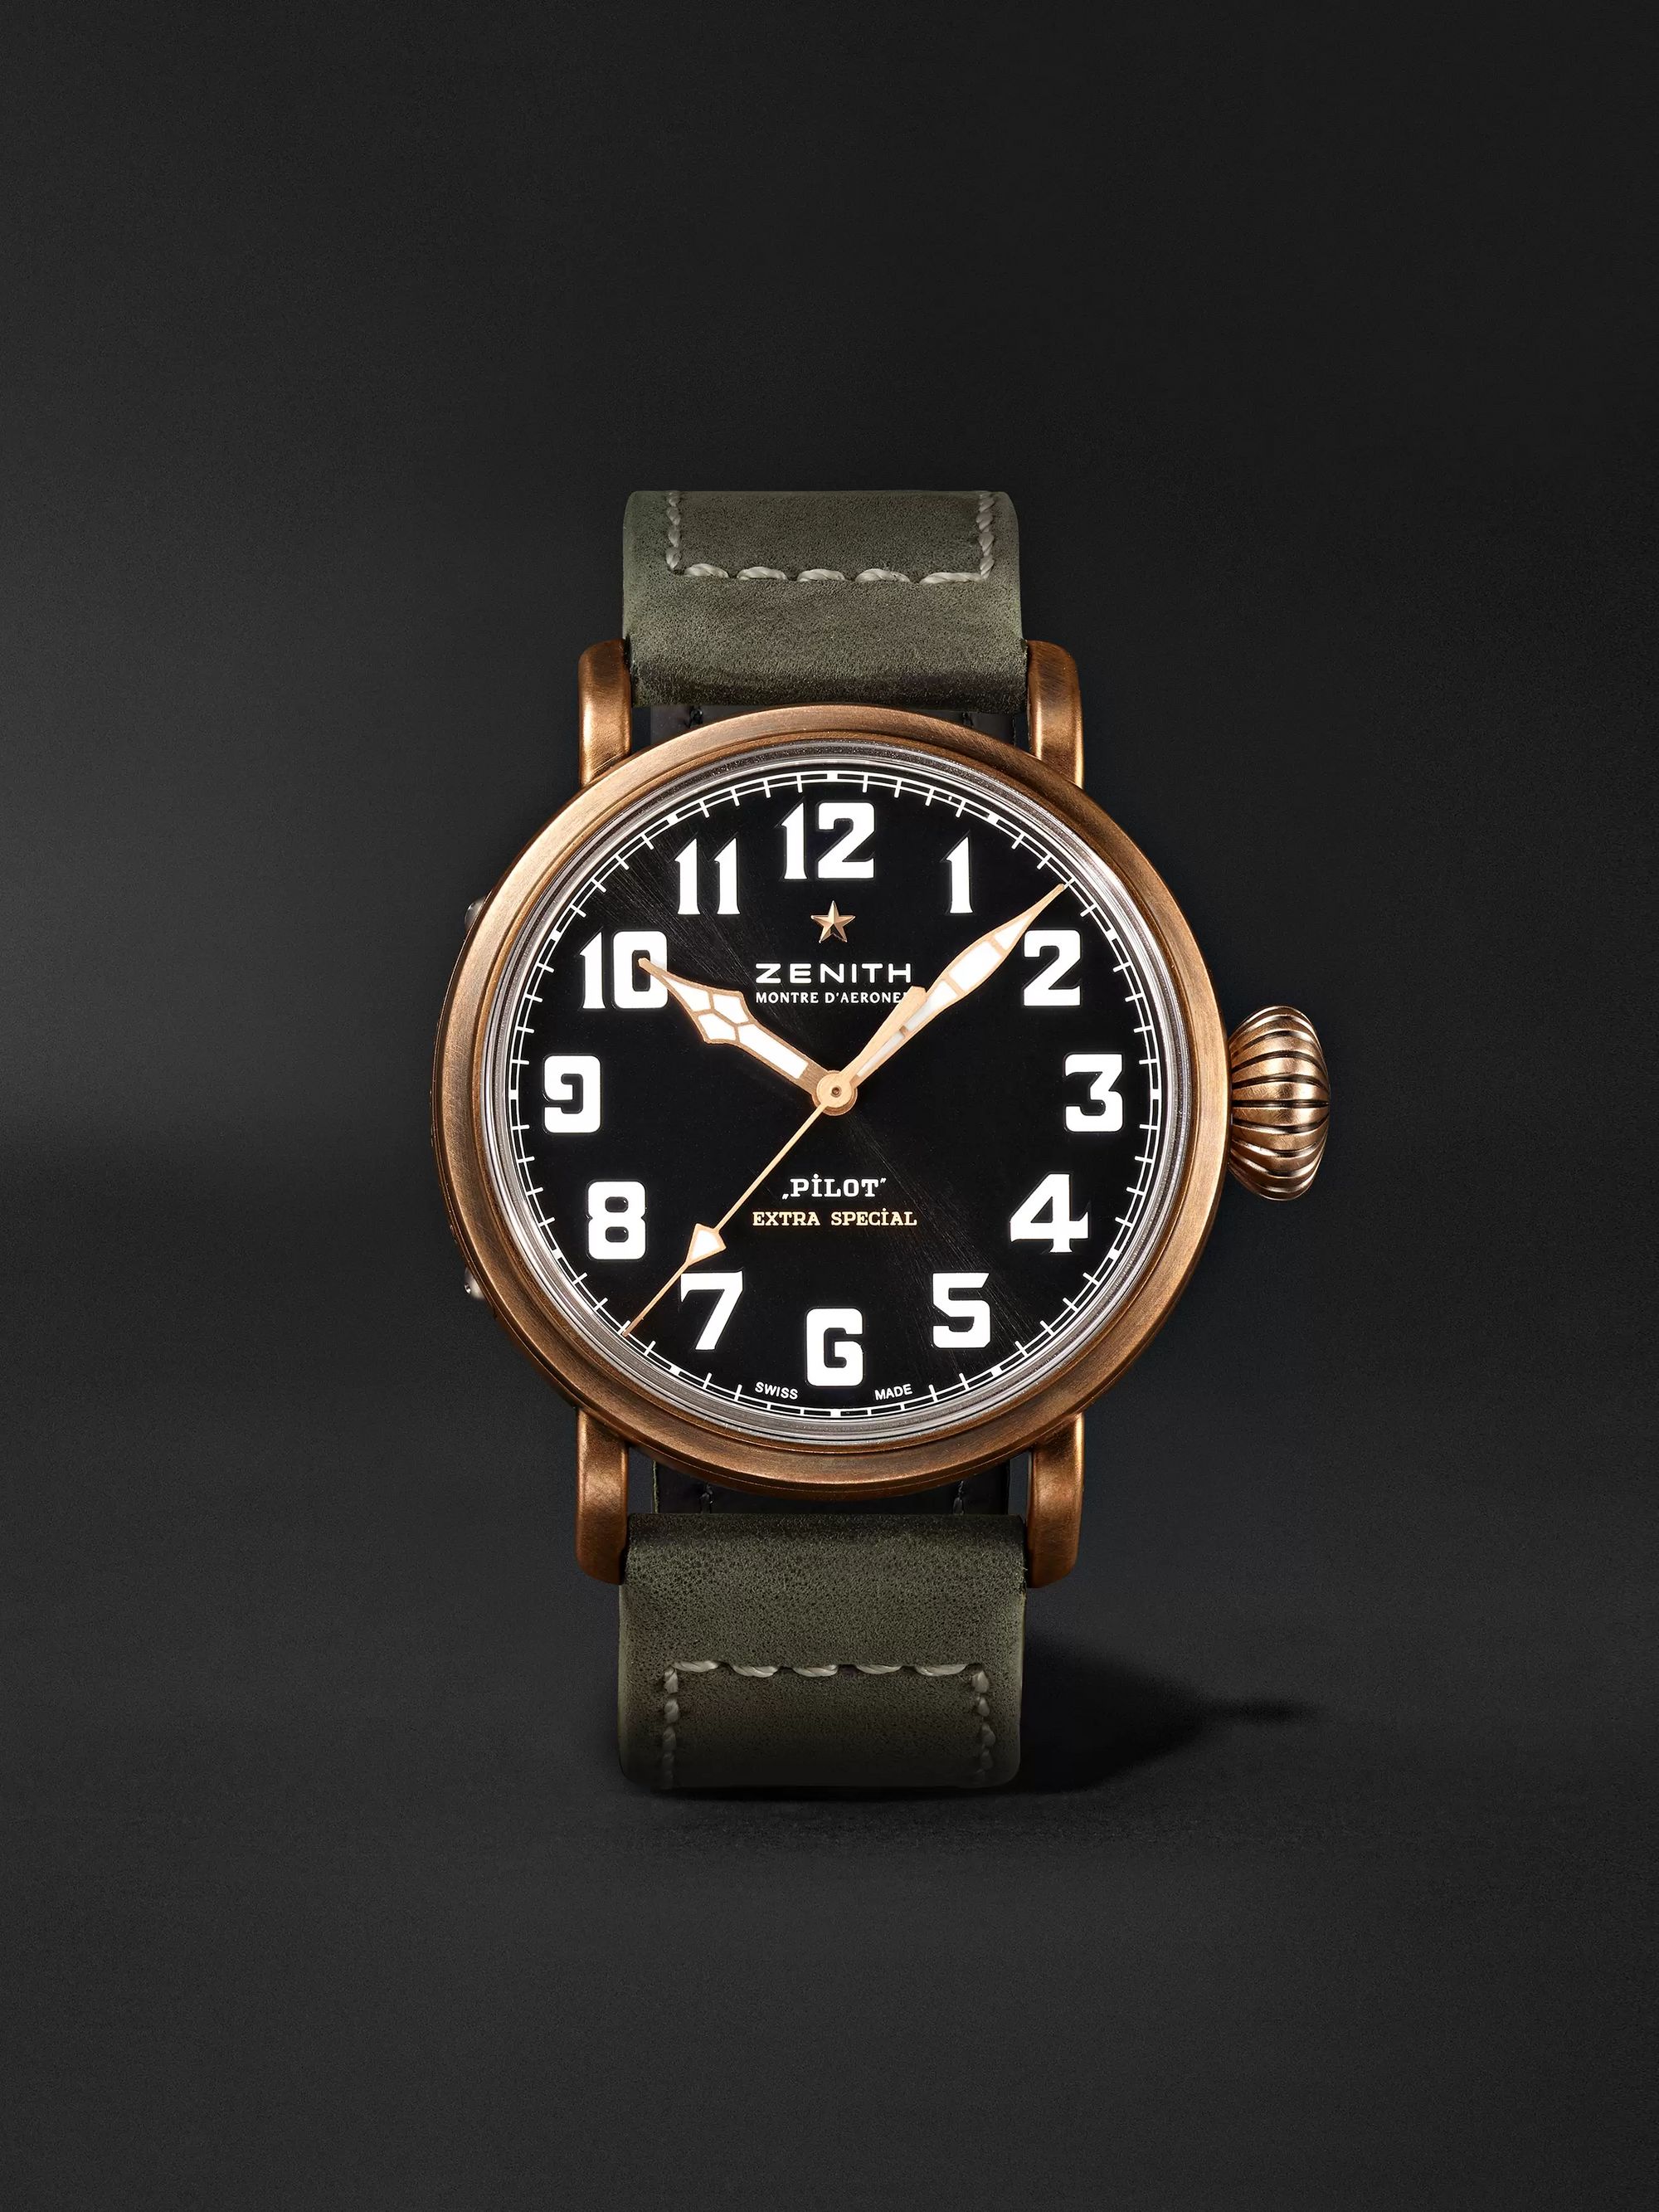 ZENITH Pilot Type 20 Extra Special Automatic 40mm Bronze and Nubuck Watch